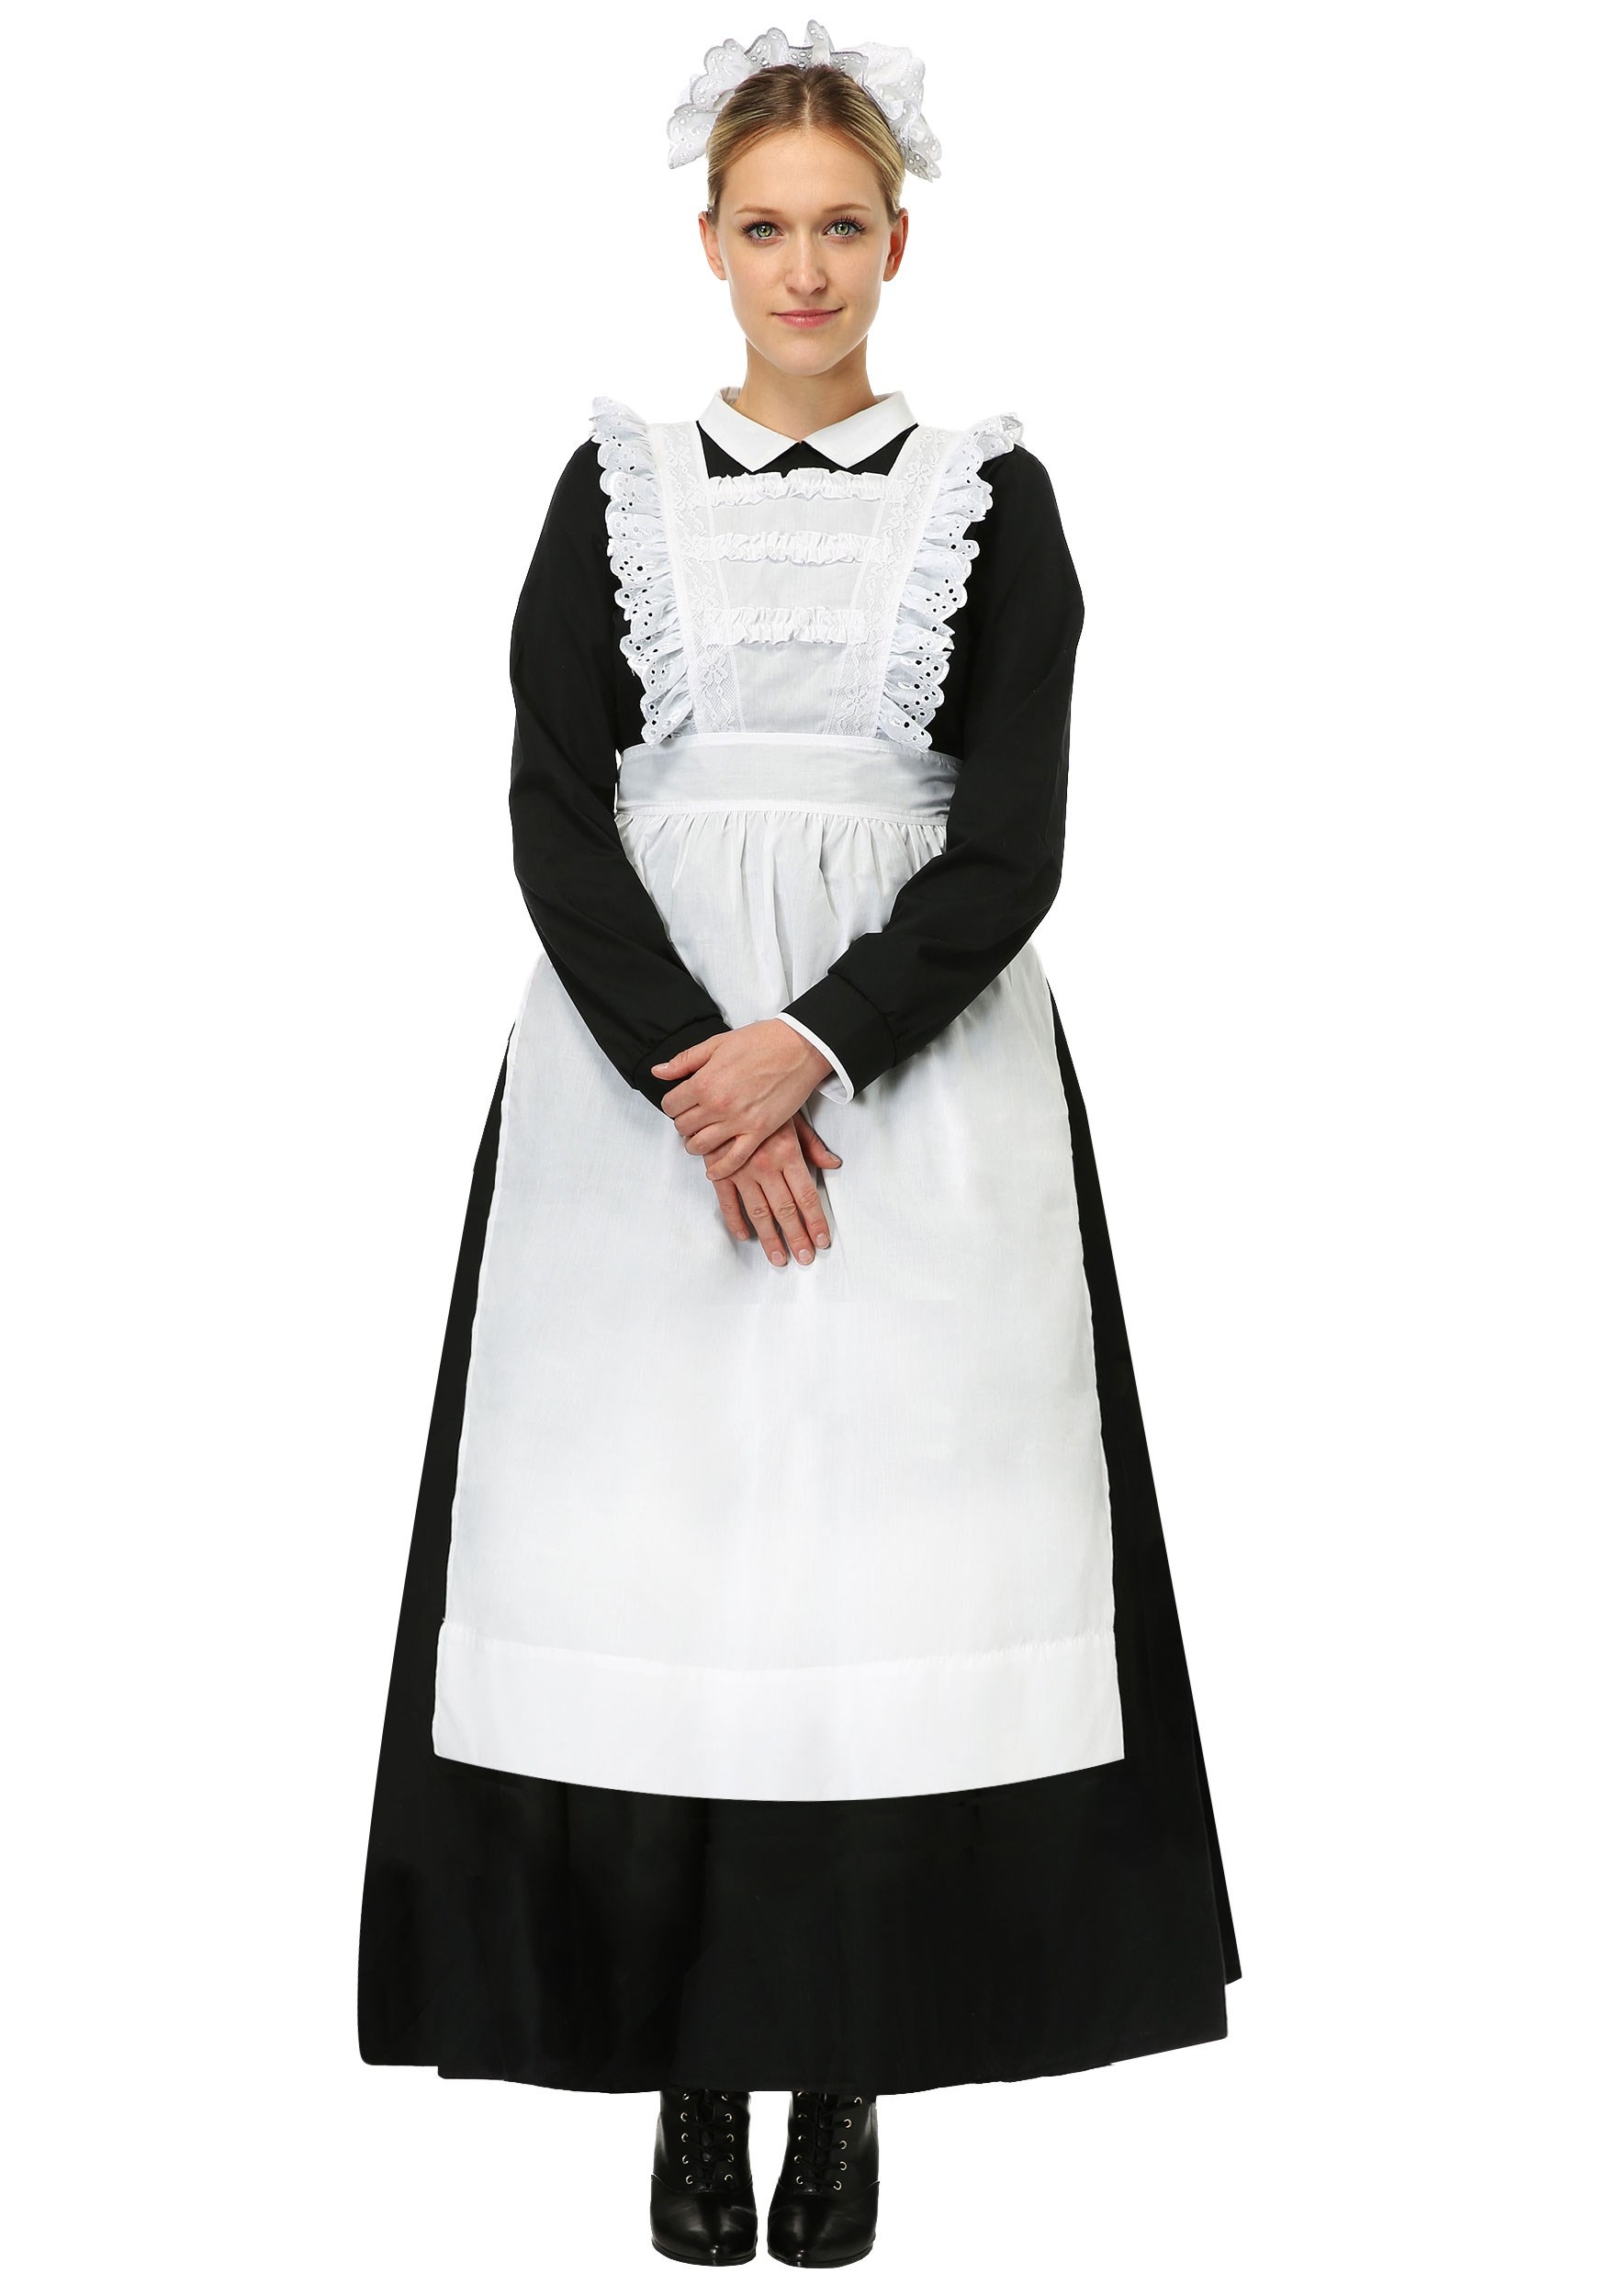 Victorian Edwardian Apron, Maid Costume & Patterns Traditional Plus Size Maid Costume for Women $69.99 AT vintagedancer.com